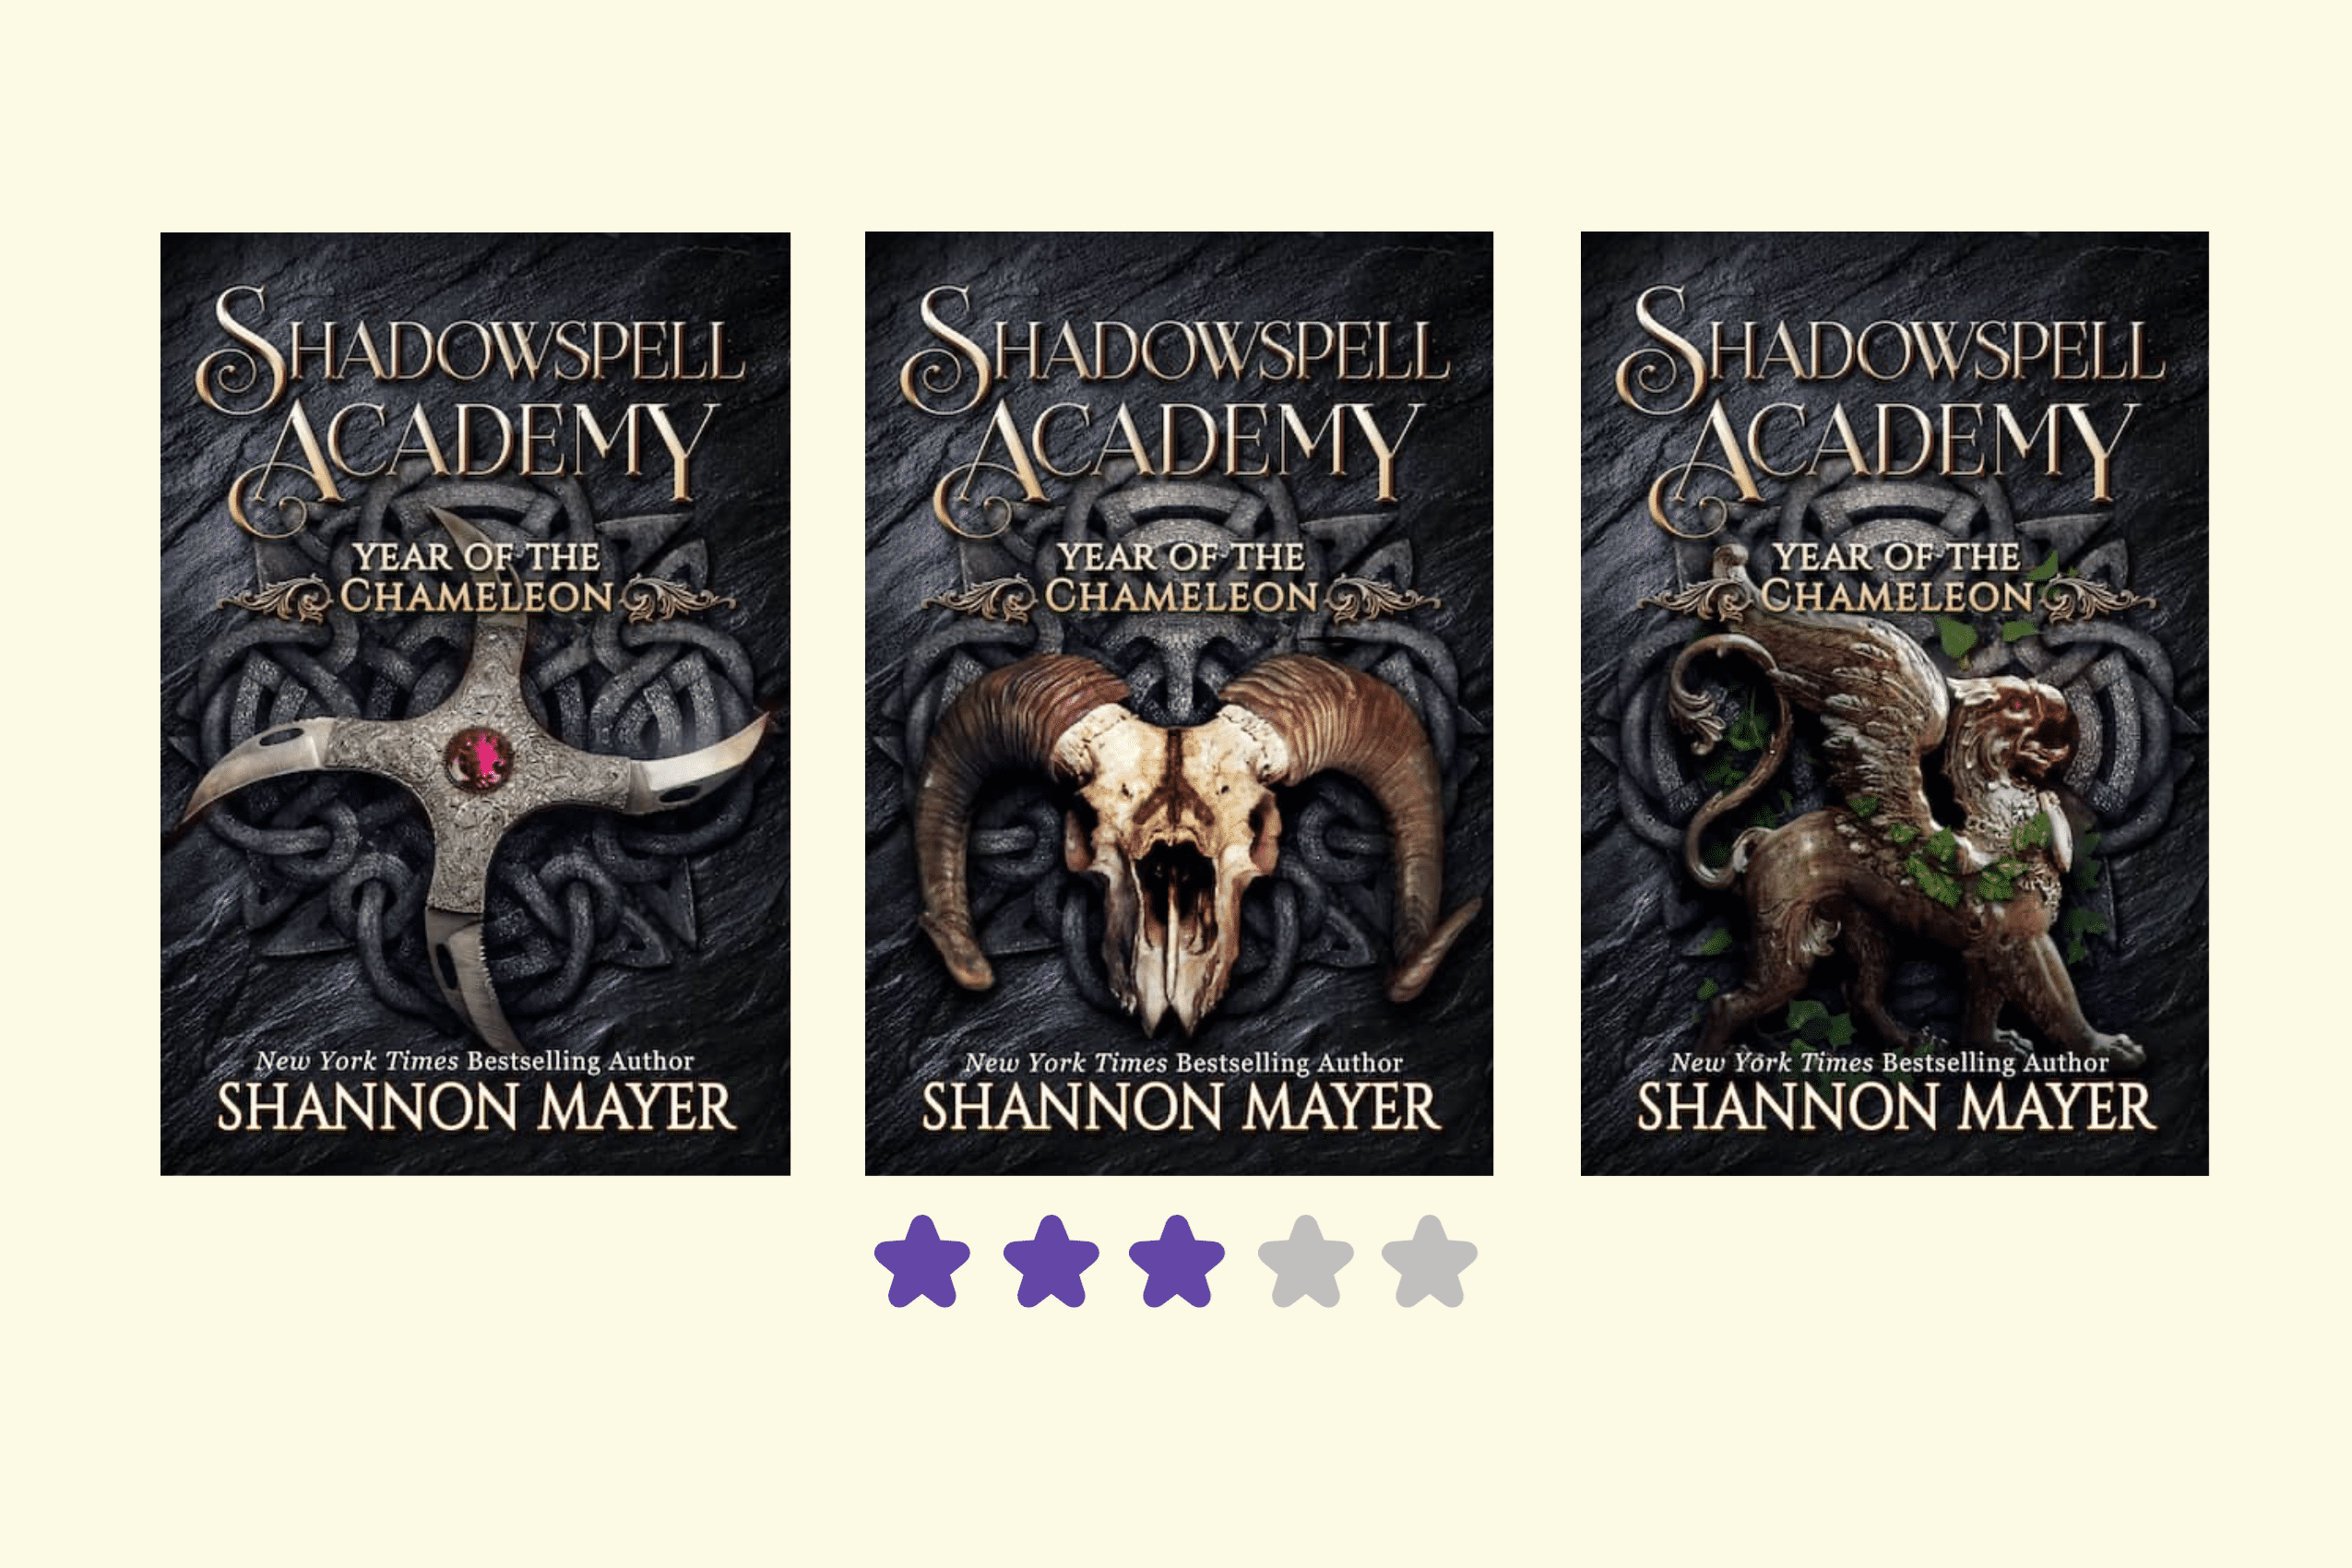 Shadowspell Academy (books 4-6) by Shannon Mayer